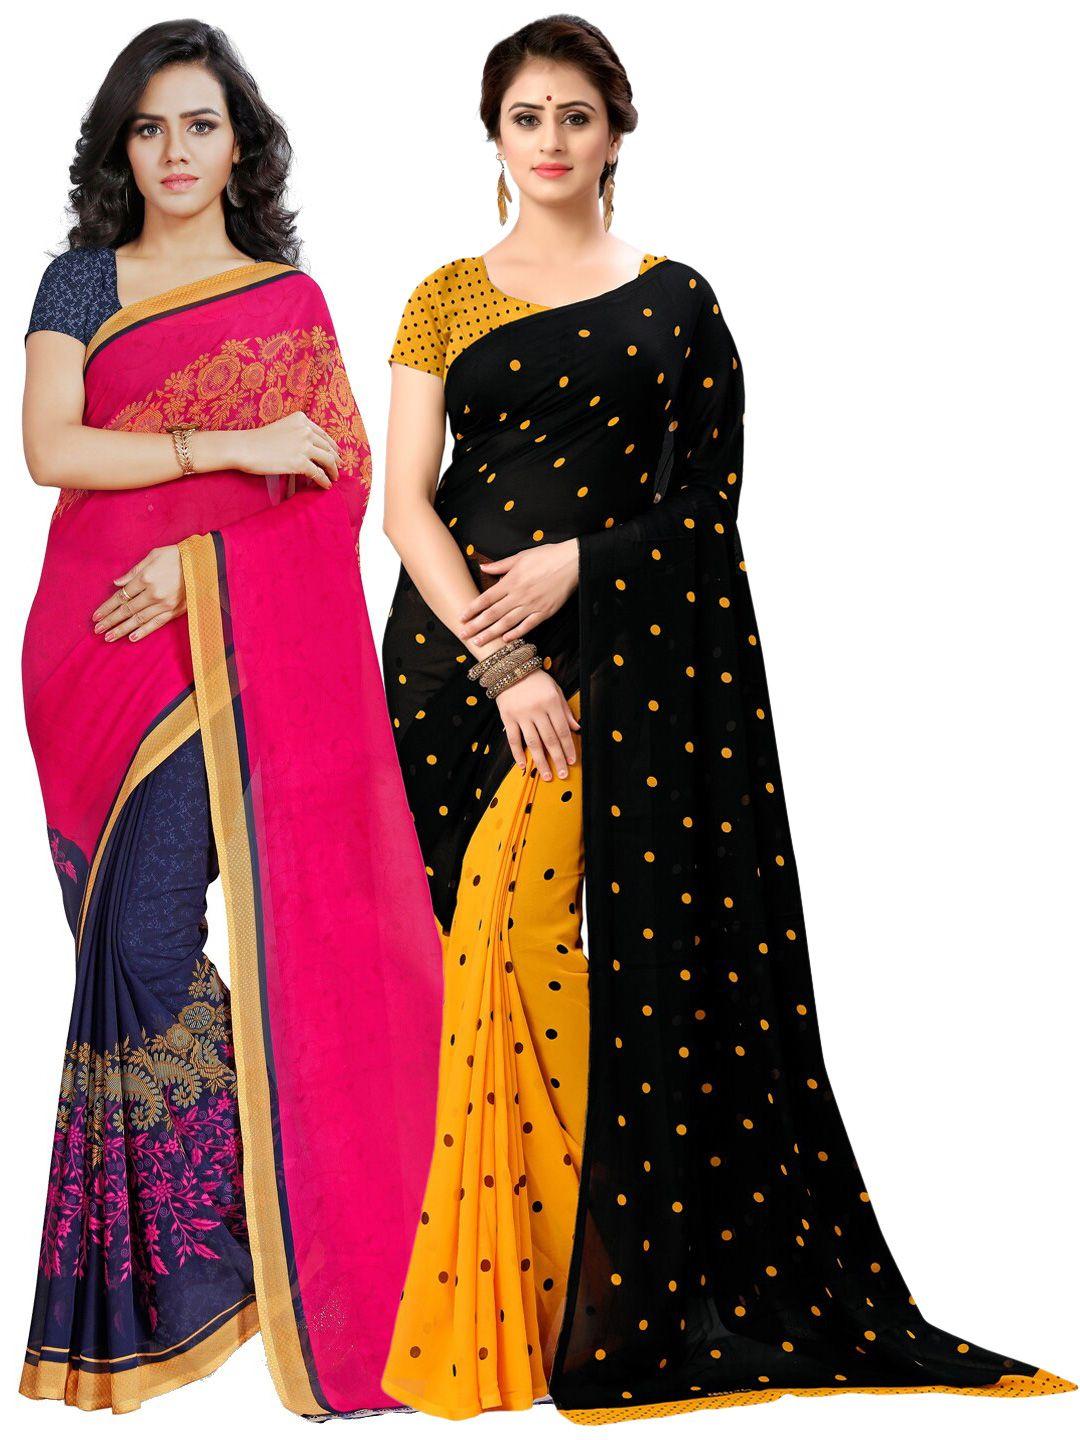 kalini pack of 2 yellow & pink poly georgette sarees